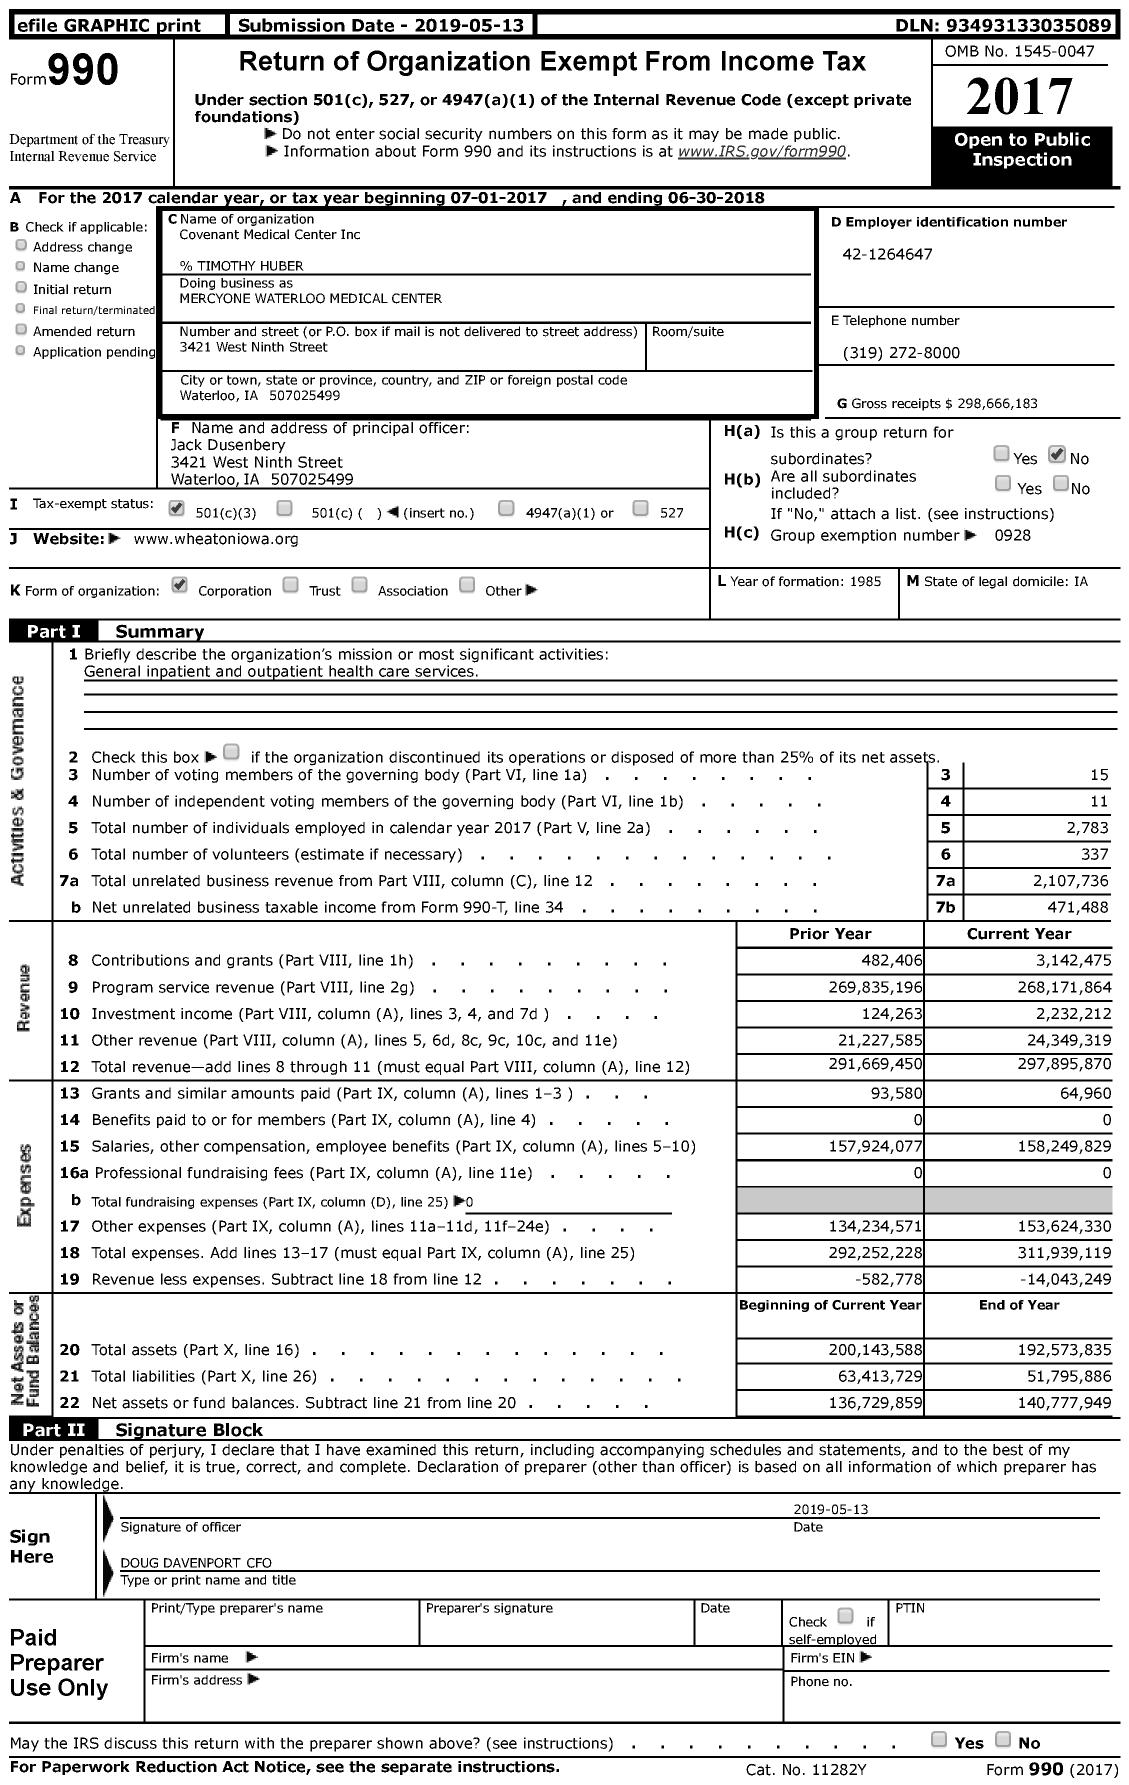 Image of first page of 2017 Form 990 for MercyOne Waterloo Medical Center